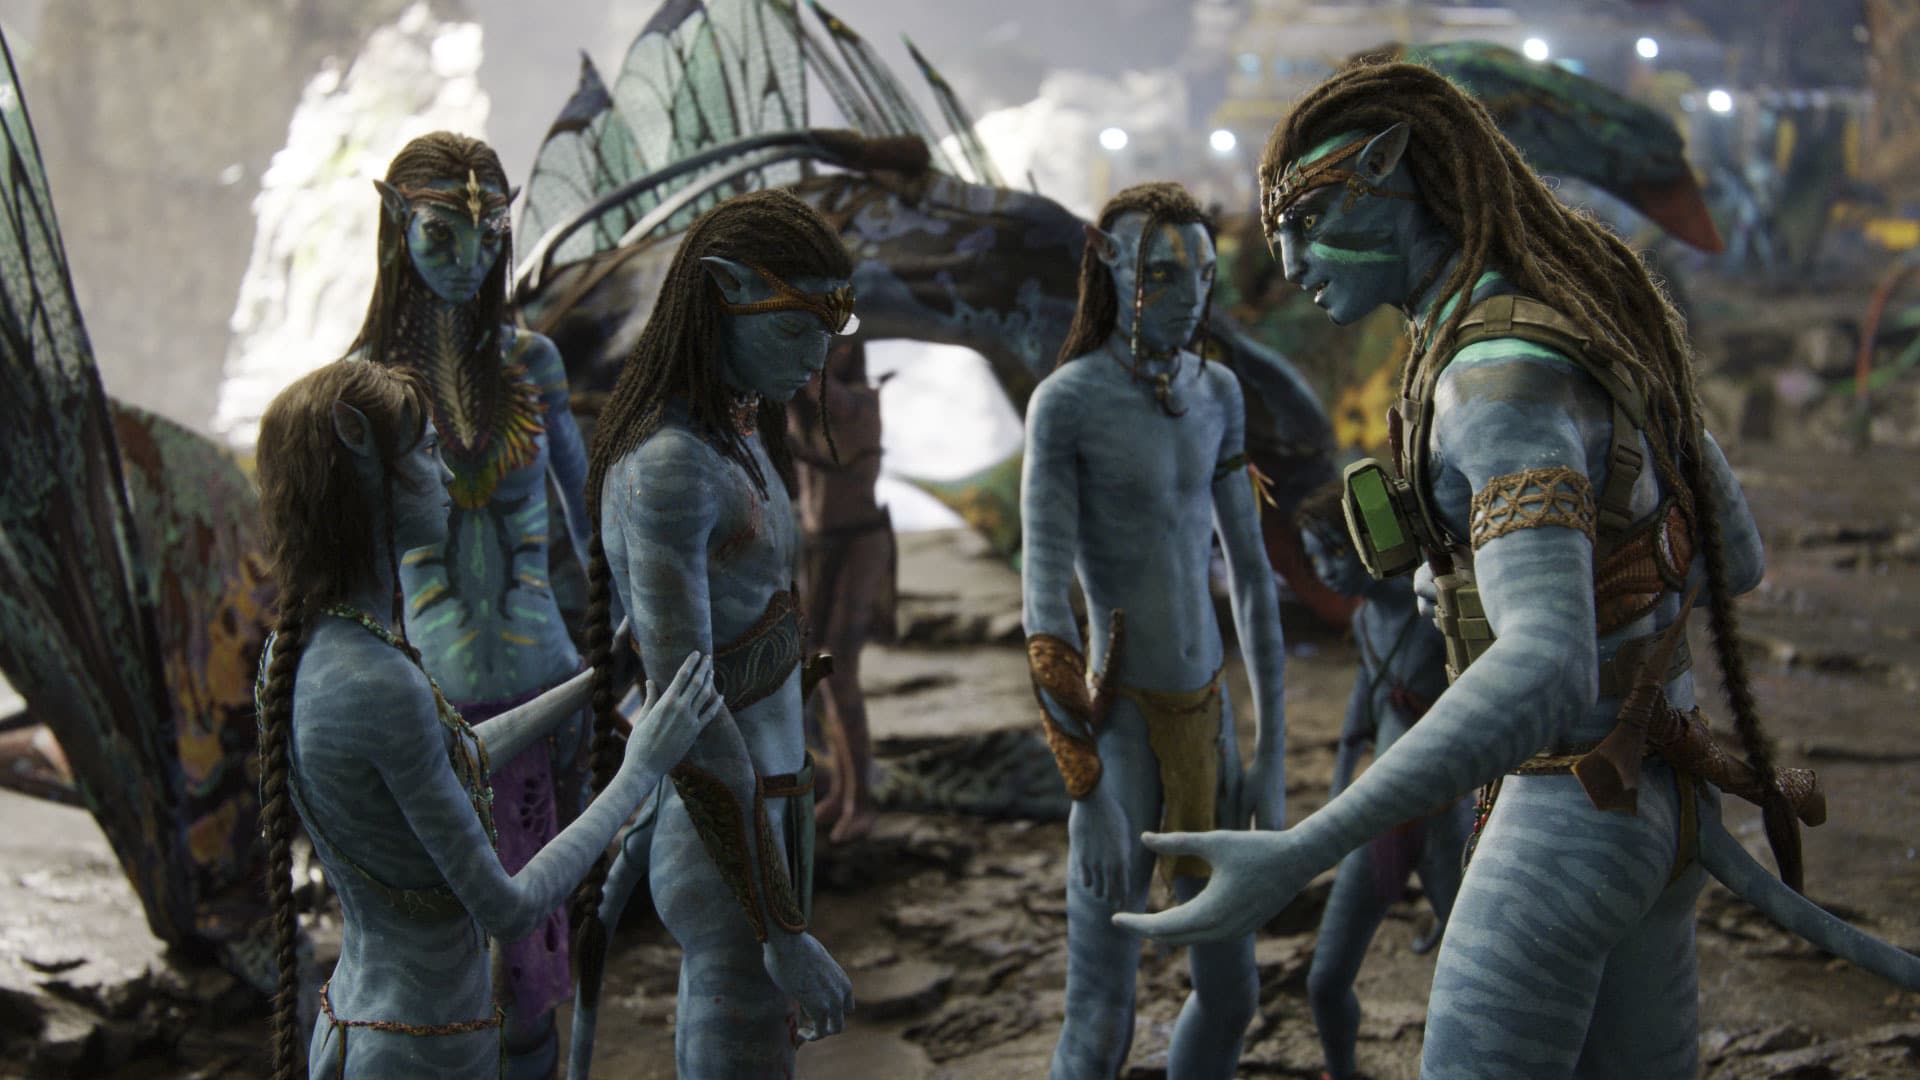 'Avatar: The Way of Water' nears $900 million globally, boosted by international..